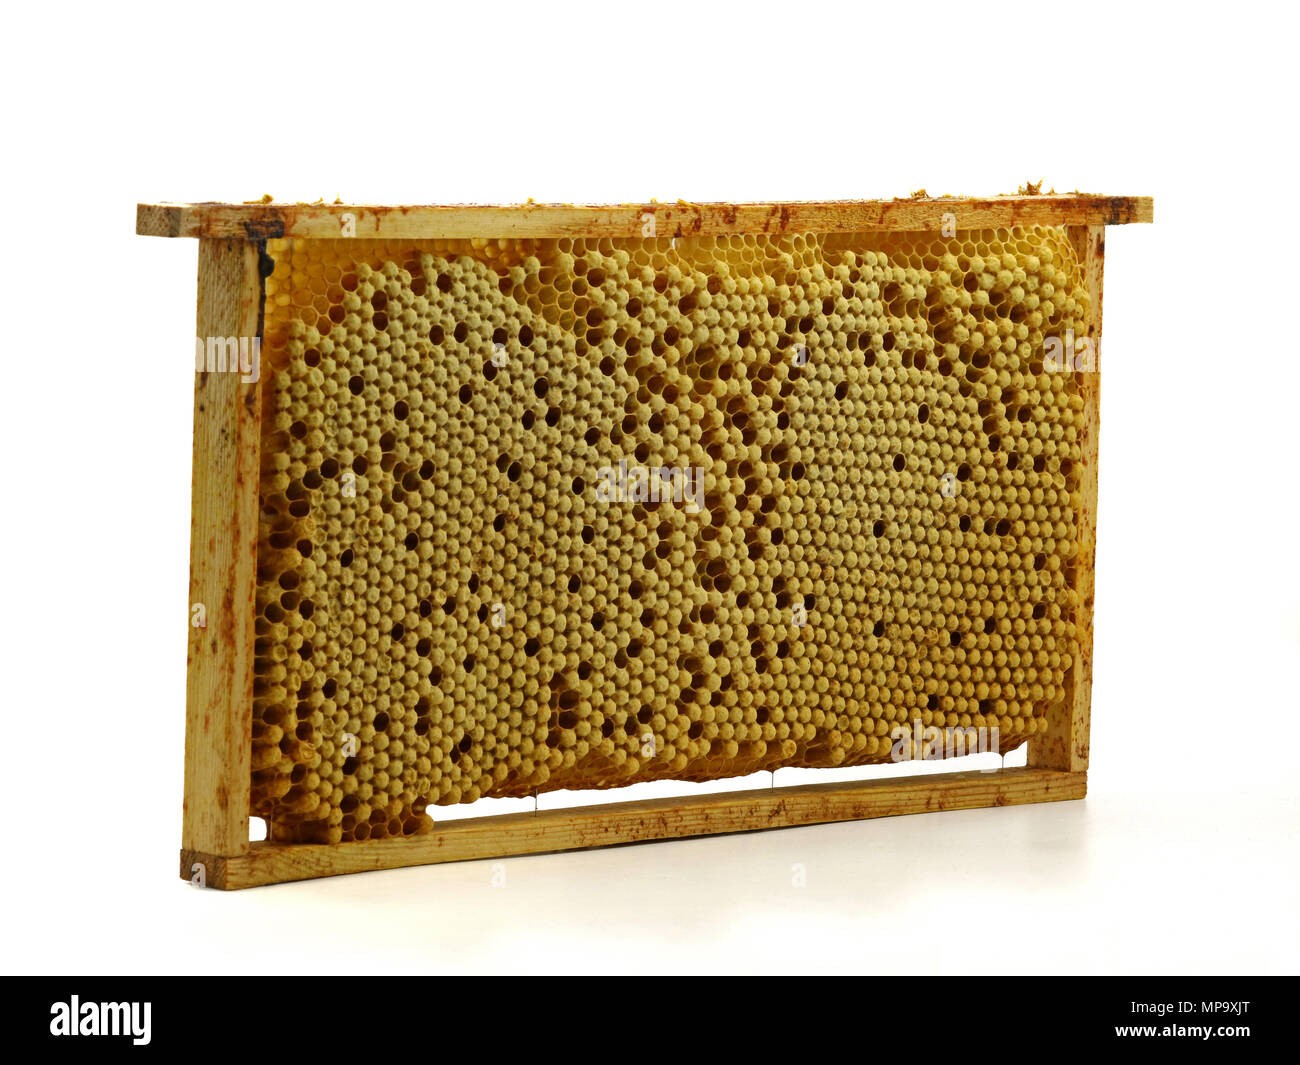 whole bee comb with drone eggs, brood isolated on white background Stock Photo